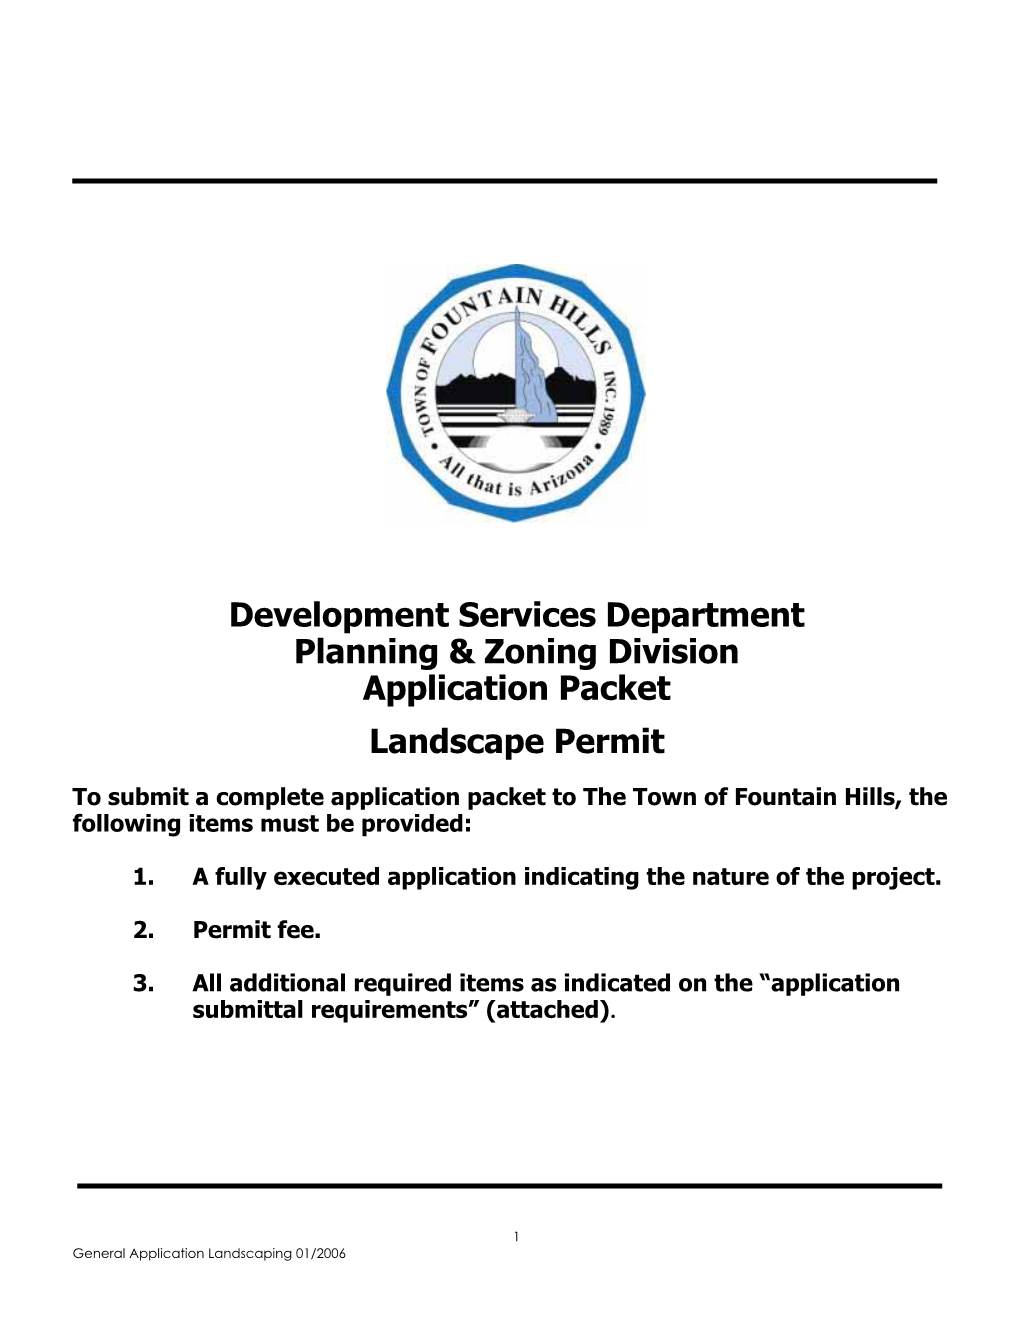 Landscaping Permit Application